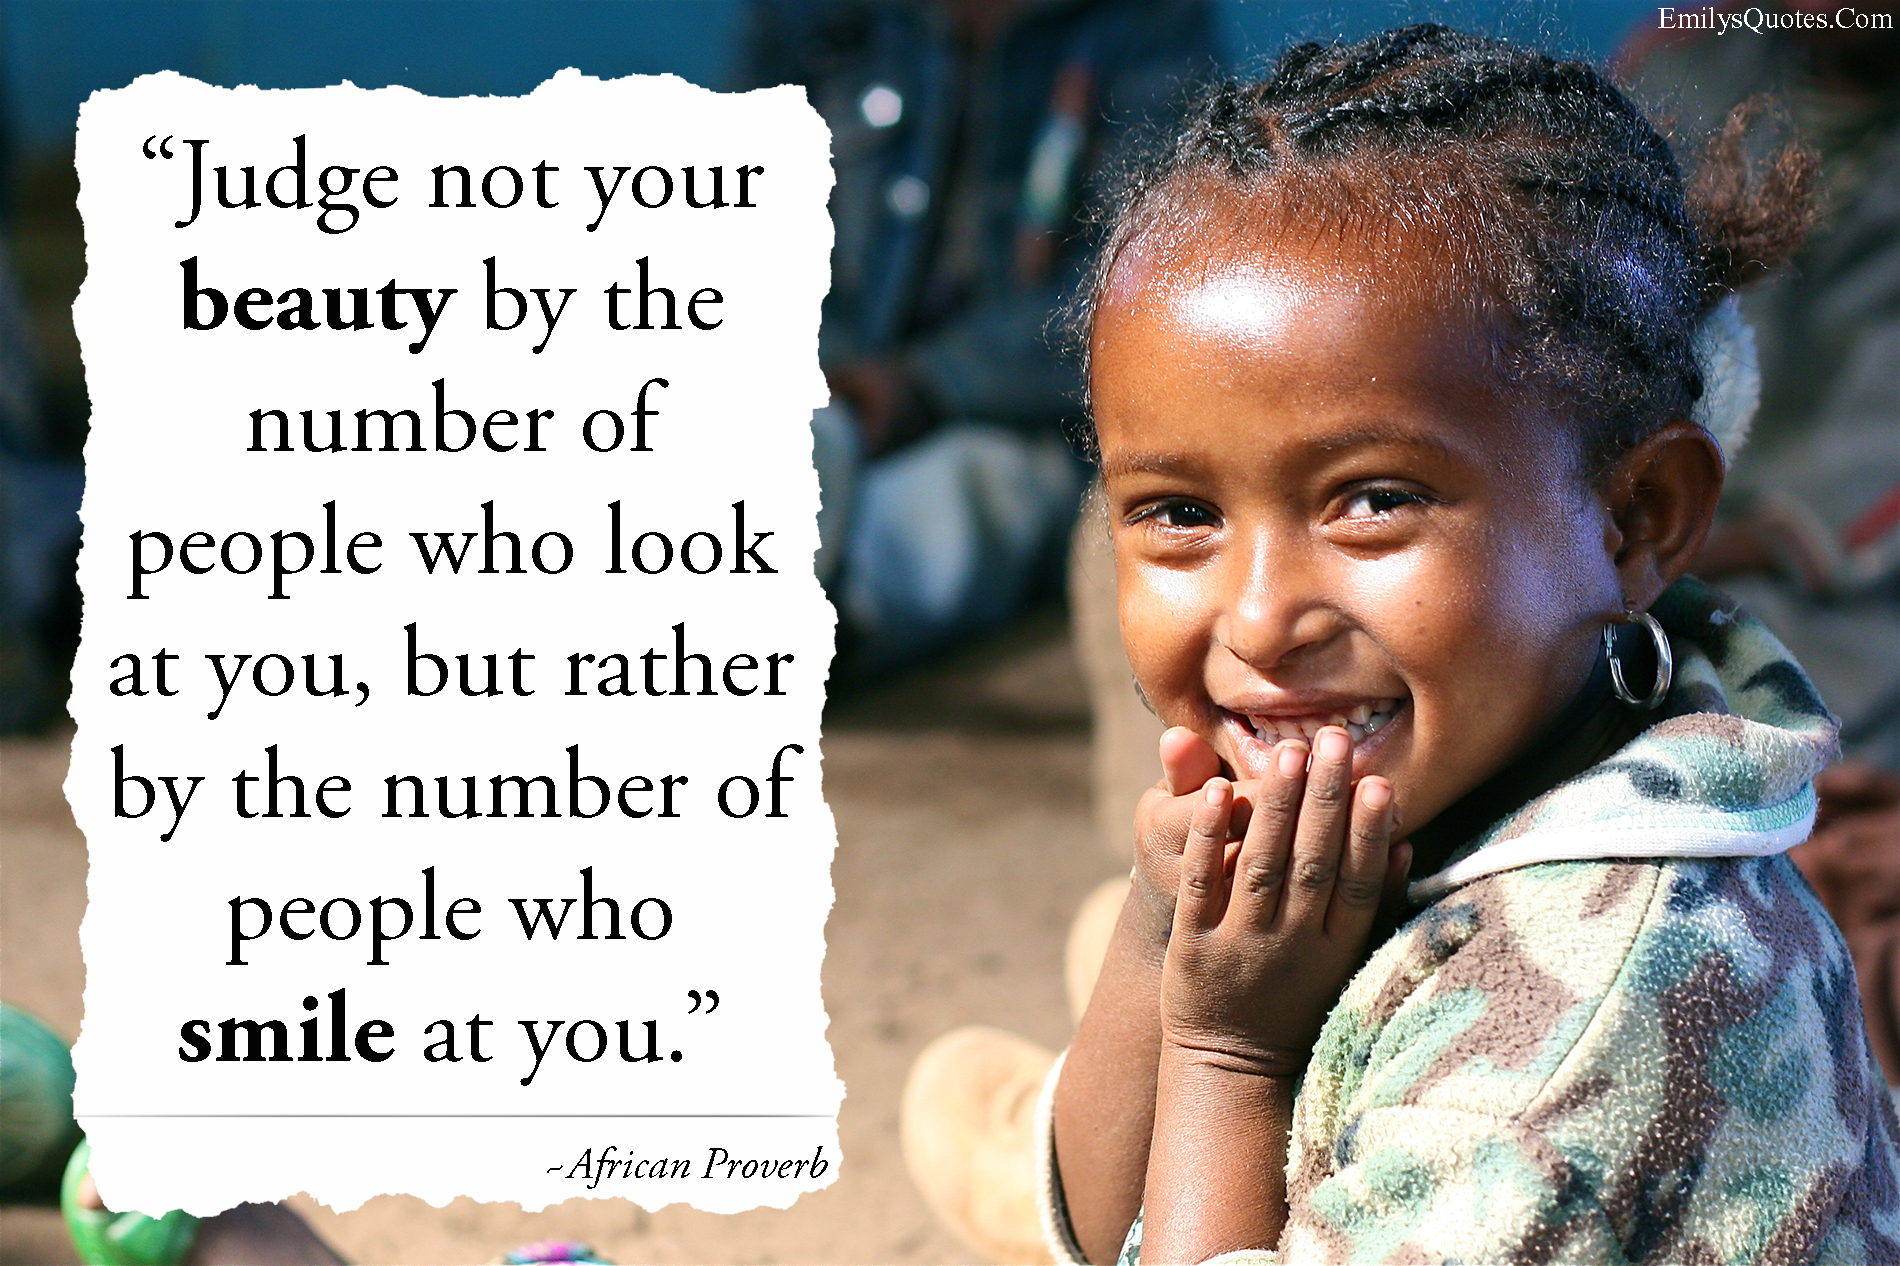 Judge not your beauty by the number of people who look at you, but rather by the number of people who smile at you